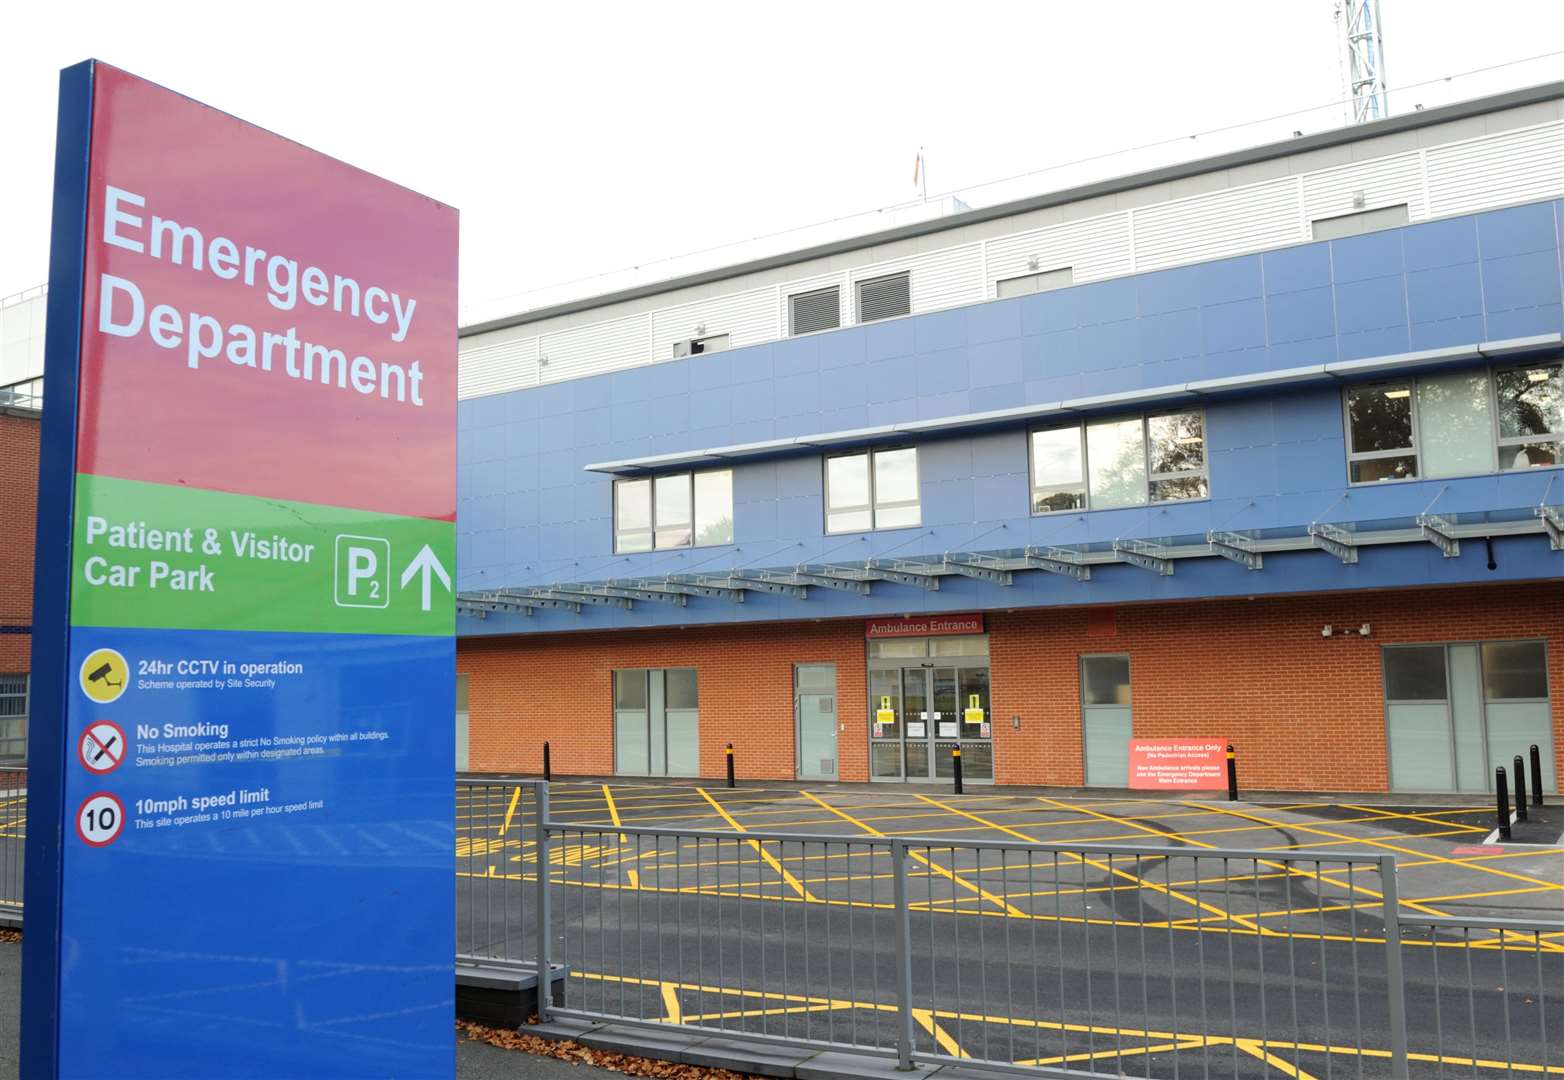 Medway Maritime Hospital’s new emergency department